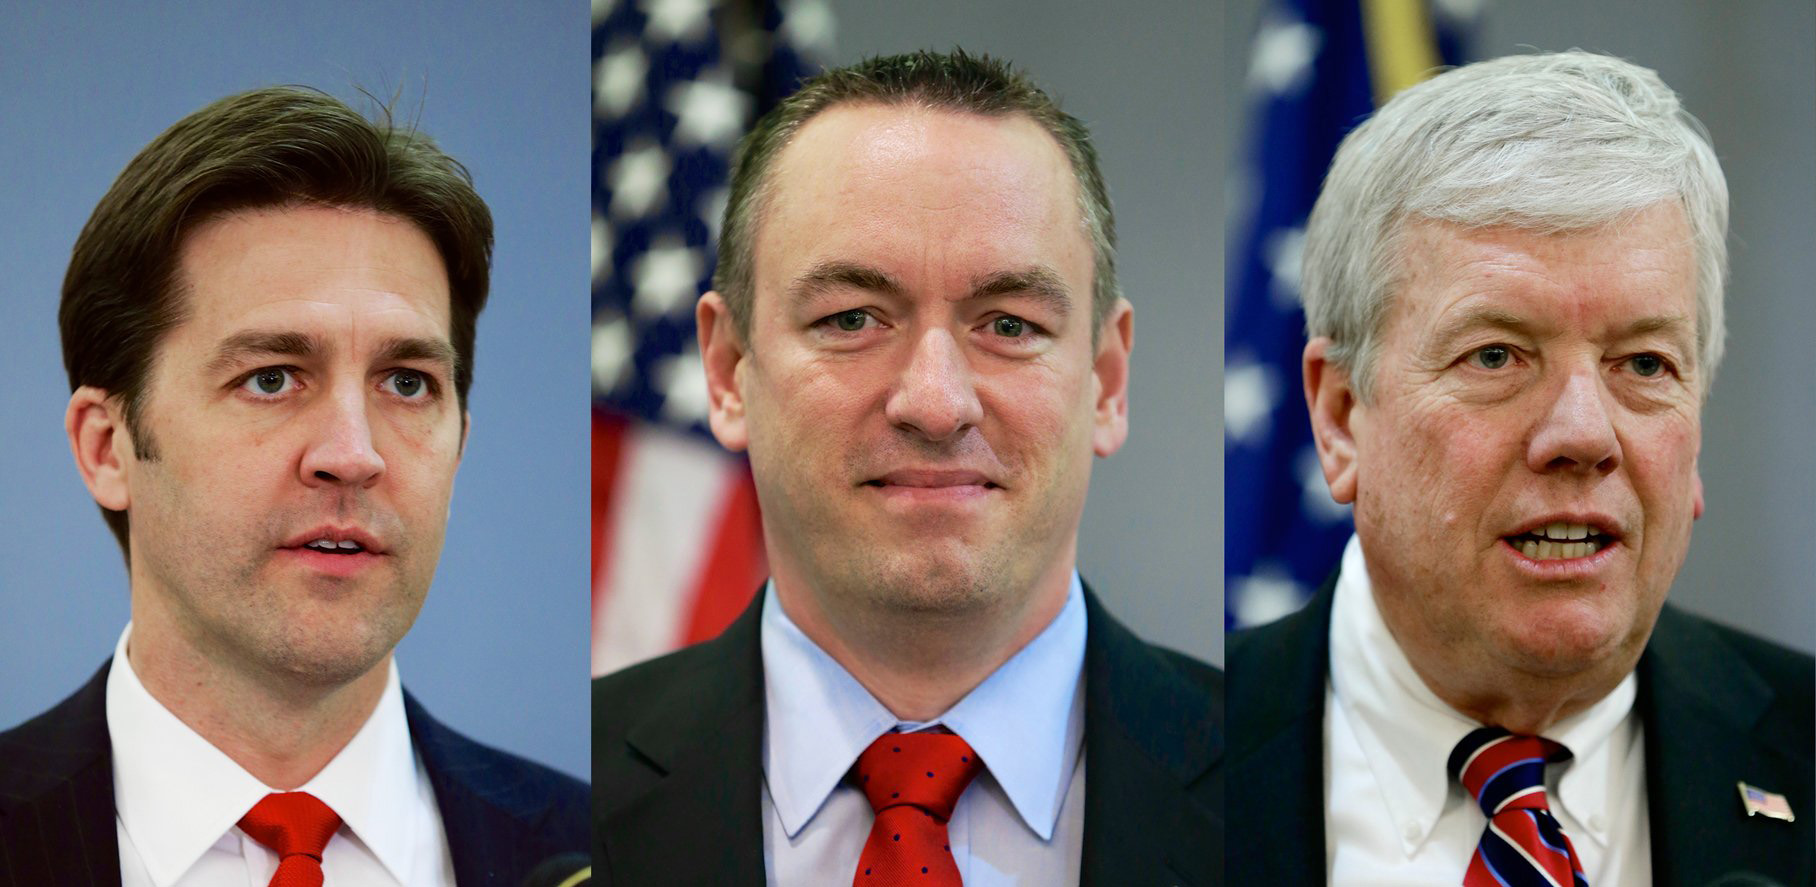 This combo picture contains photos of Nebraska Senate candidates in the May 13, 2014 primary election. From left: Ben Sasse, Shane Osborn, Sid Dinsdale. (Nati Harnik—AP)